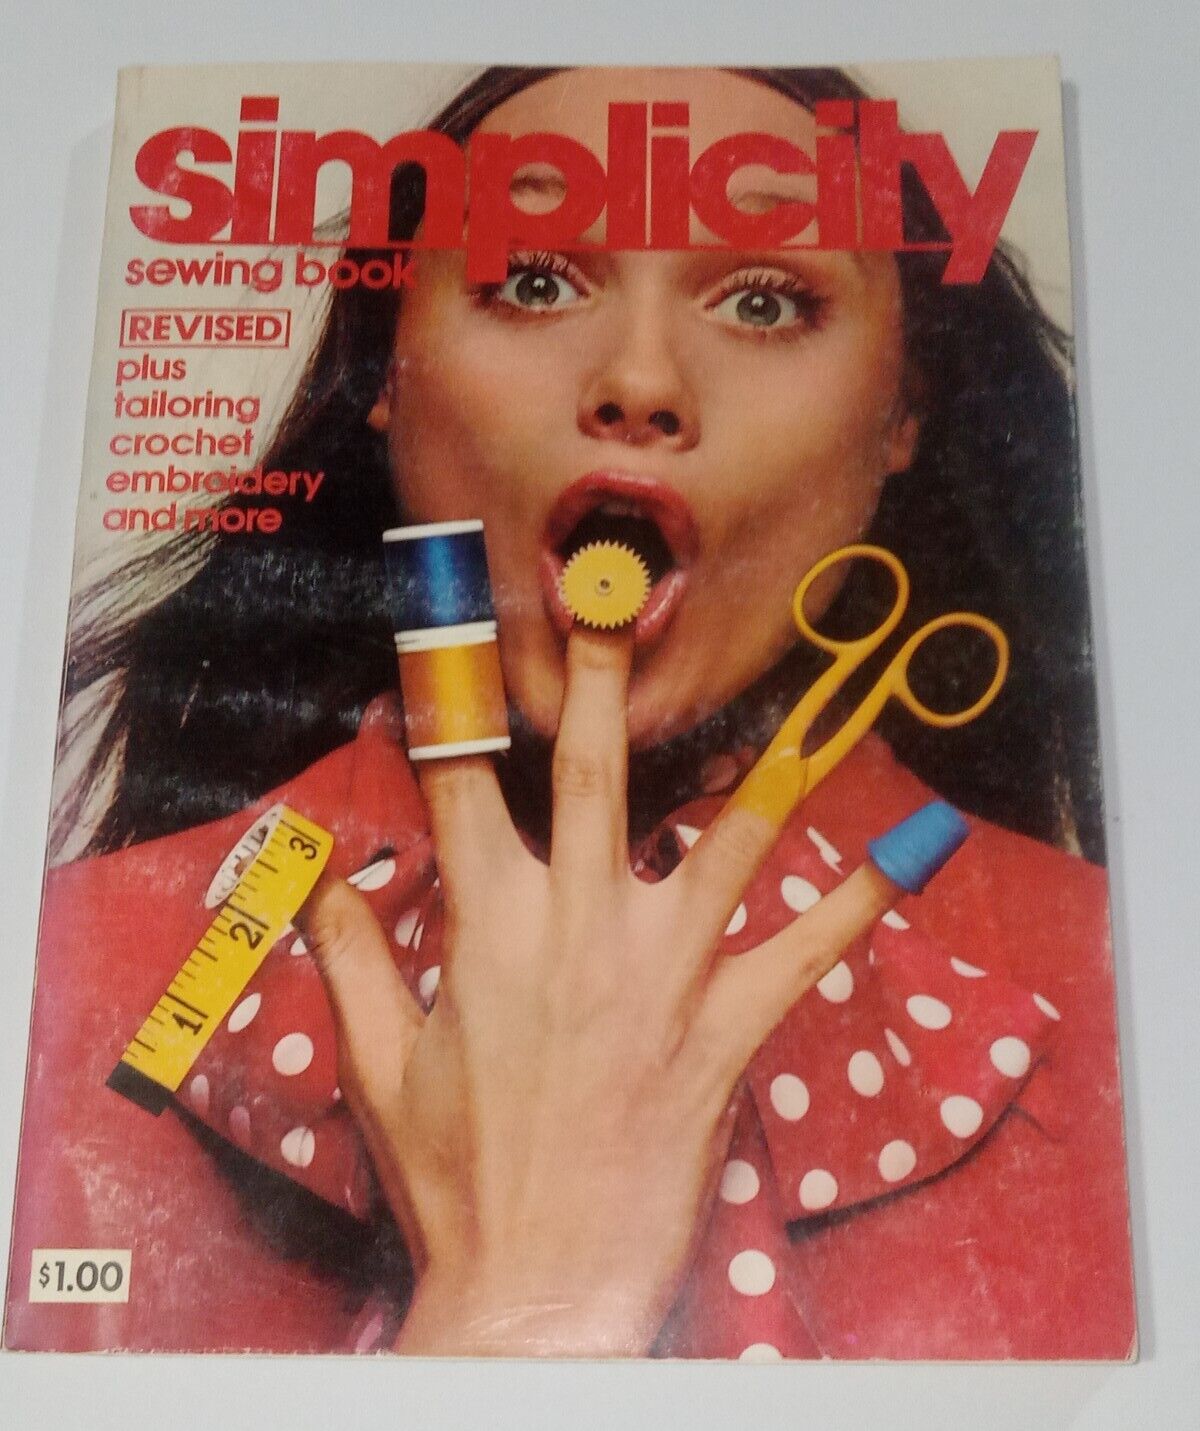 1972 Simplicity Sewing Book Revised Tailoring Crochet Embroidery Beginner Plus